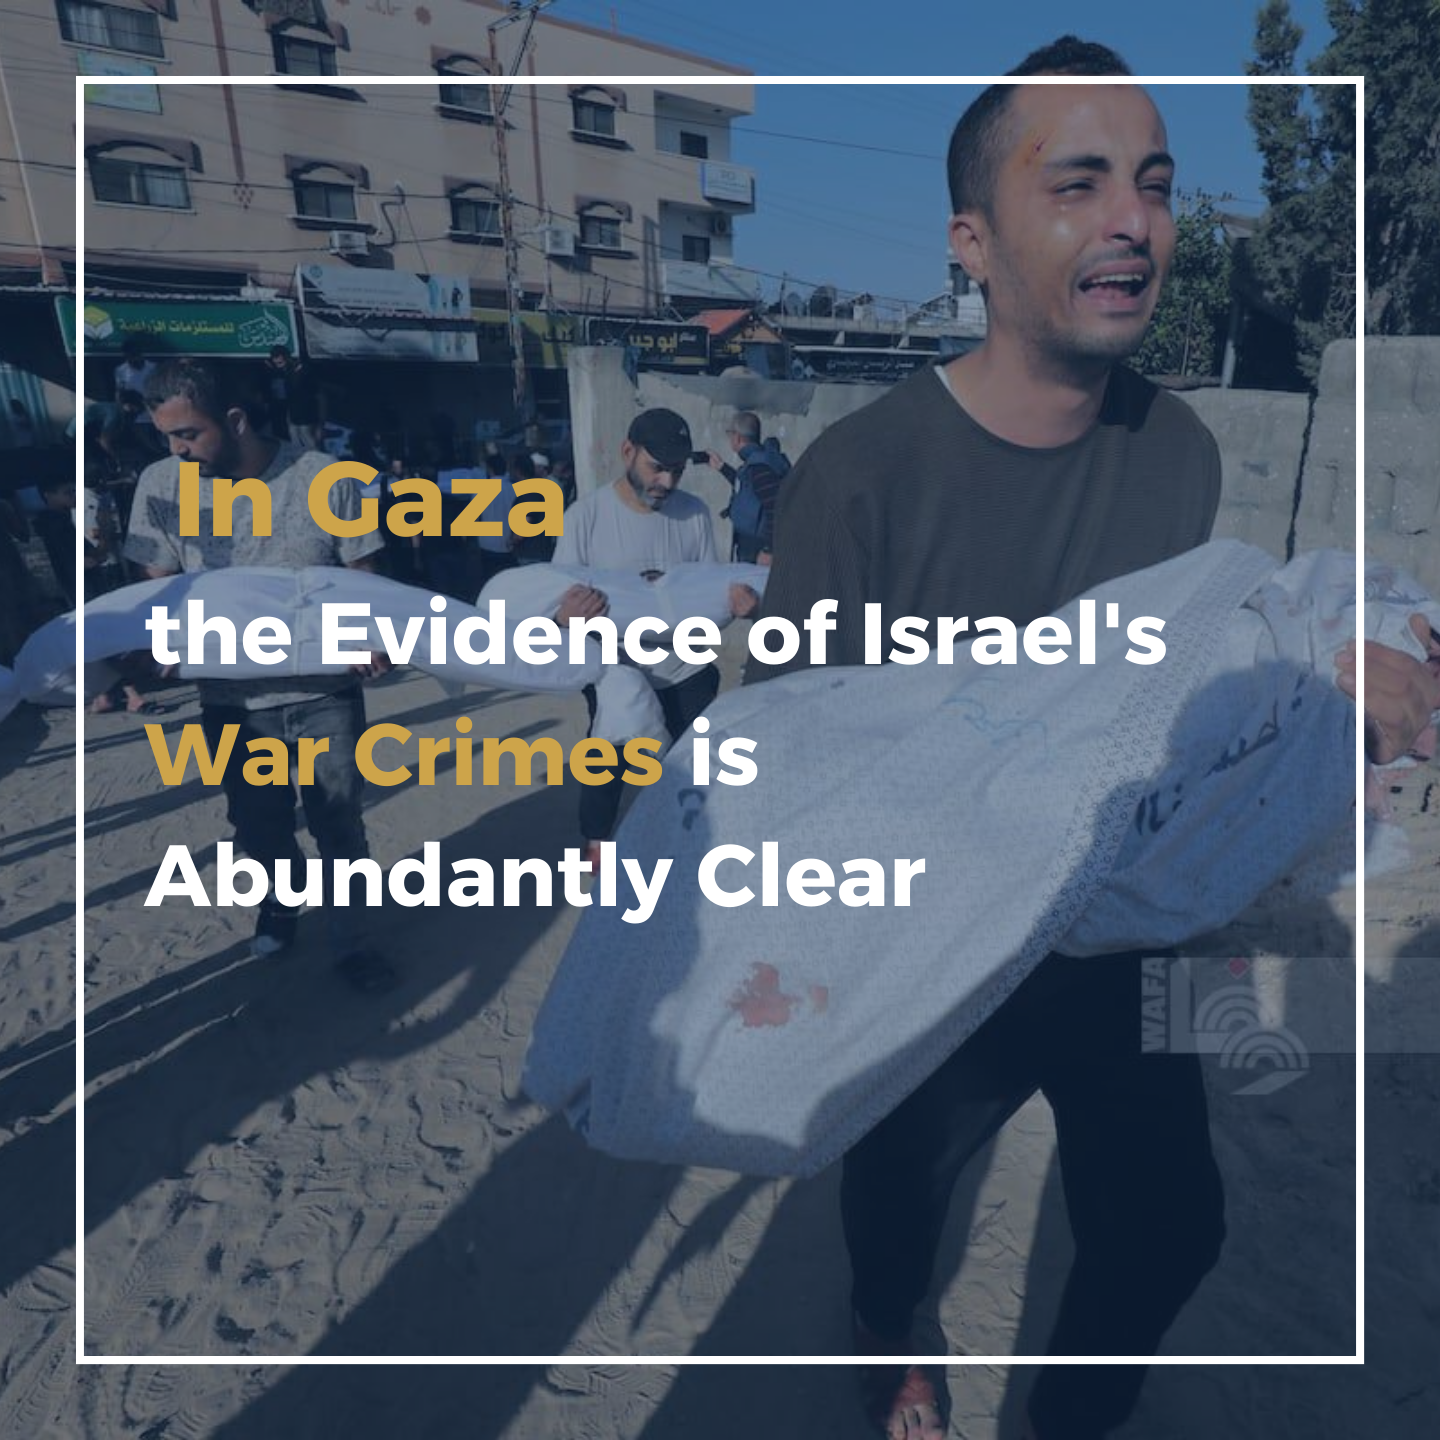 In Gaza, the Evidence of Israel’s War Crimes is Abundantly Clear